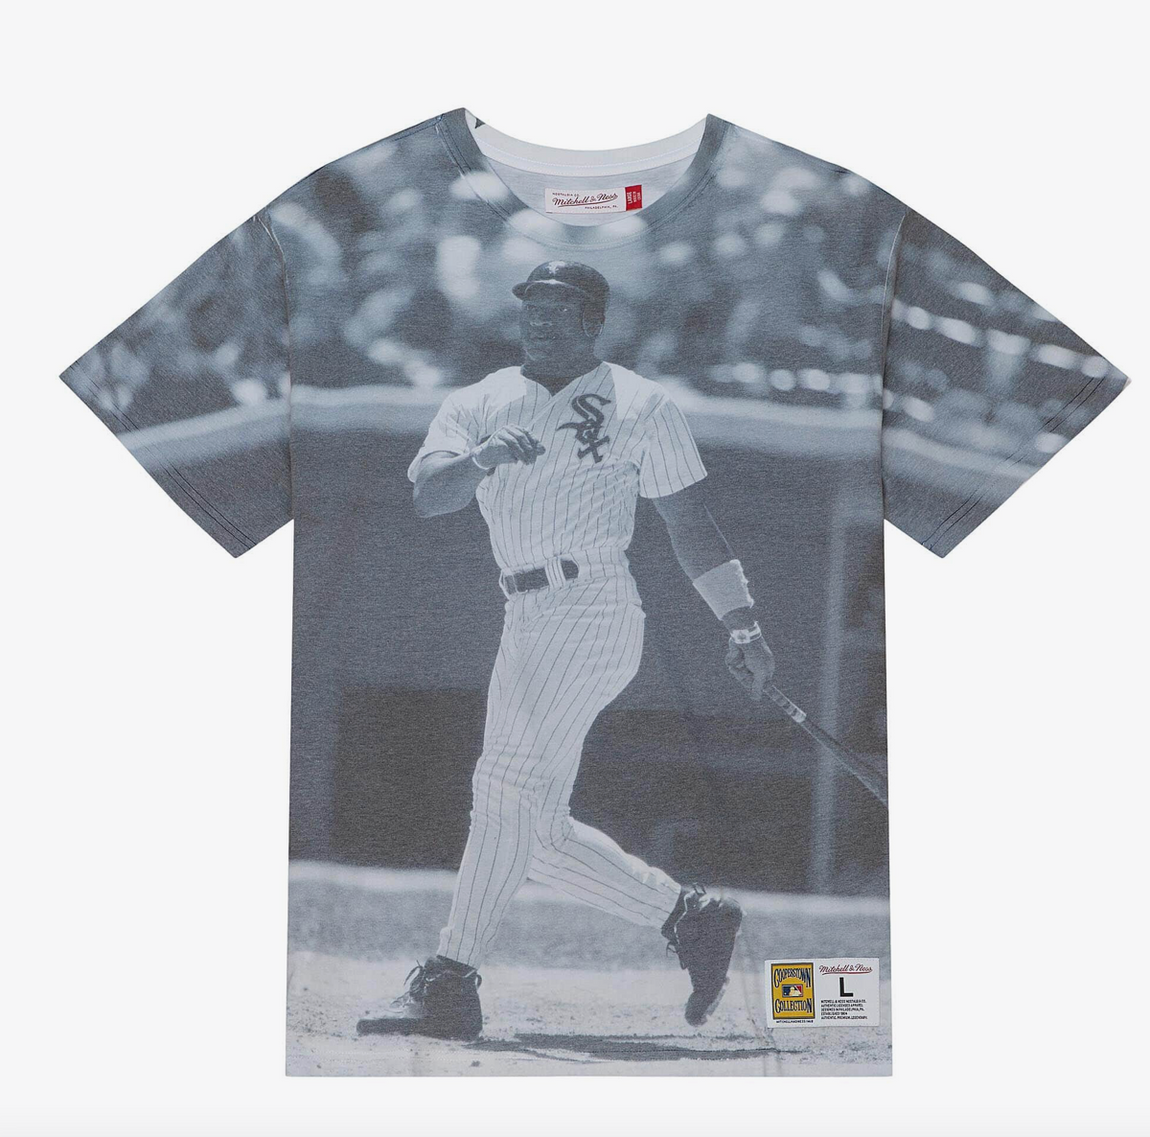 Mitchell & Ness MLB Chicago White Sox Sublimated Player Tee - Mitchell & Ness MLB Chicago White Sox Sublimated Player Tee - 